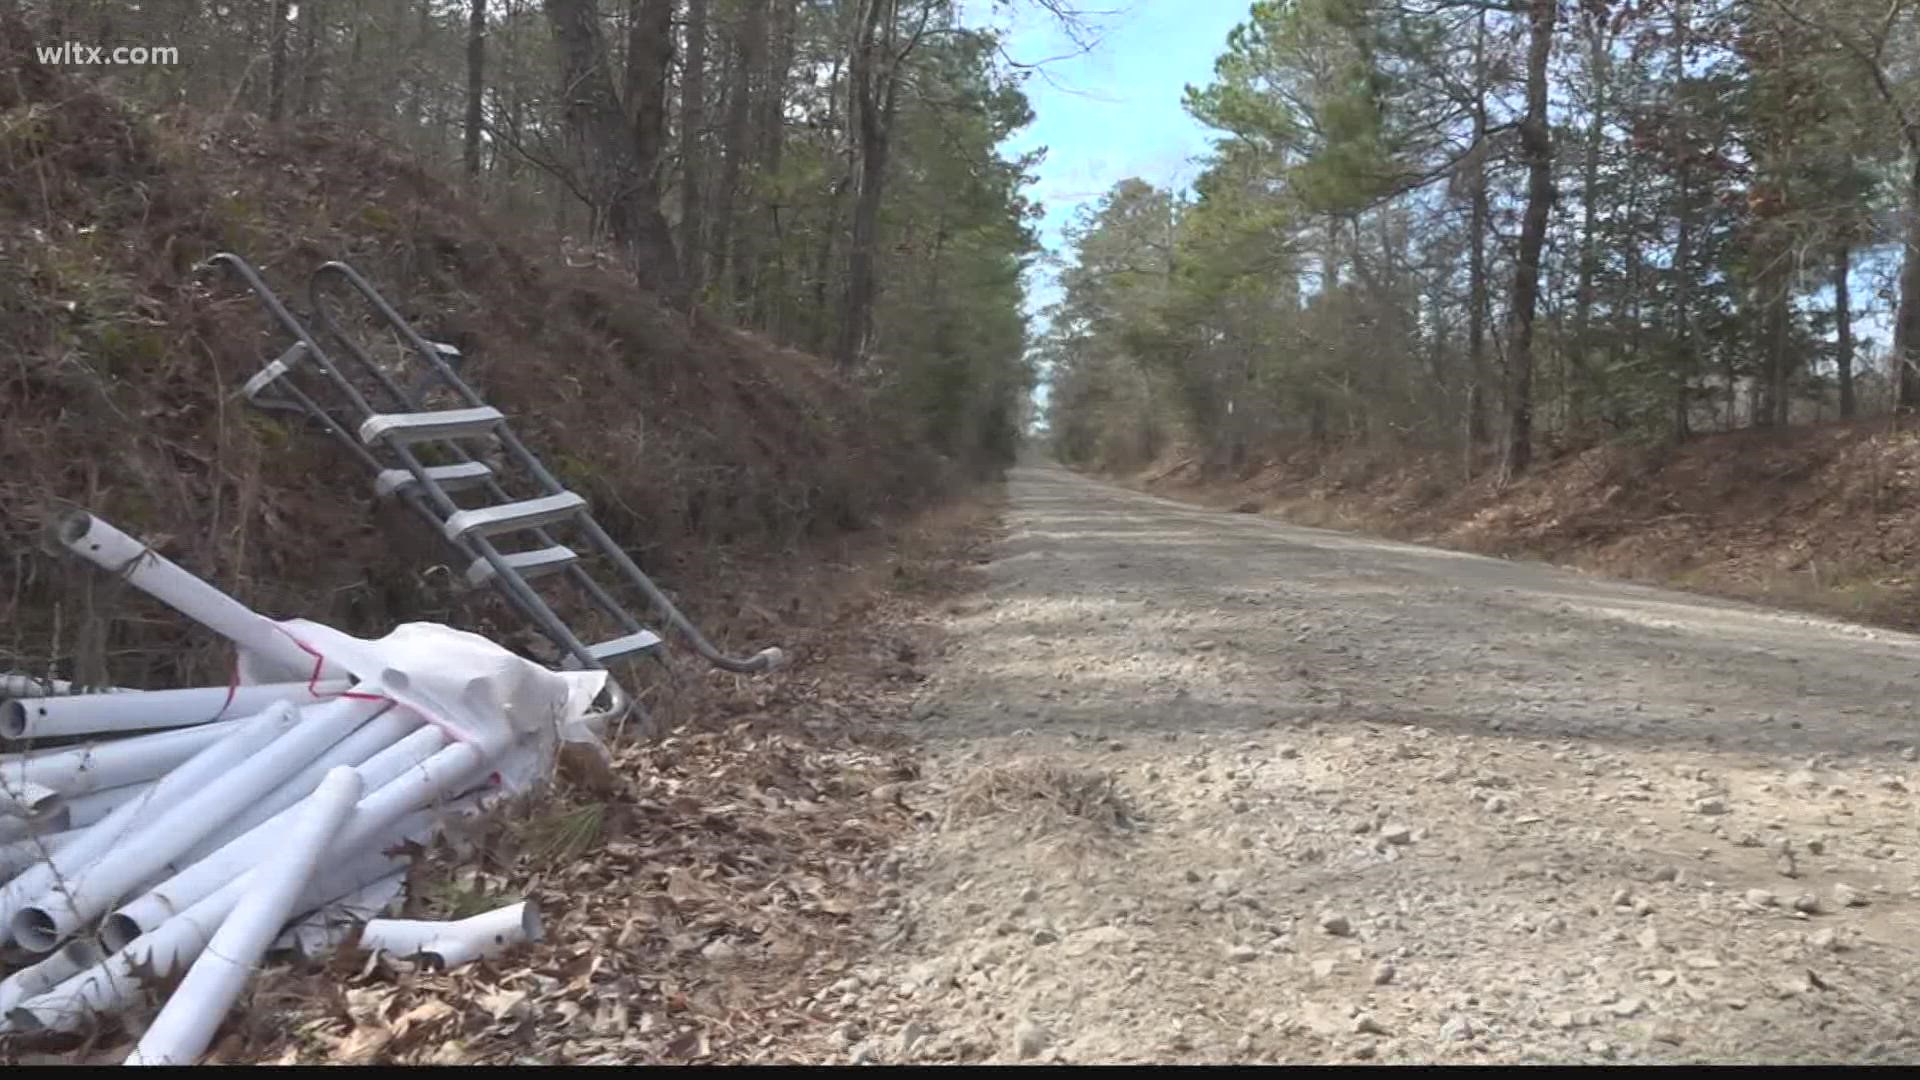 Richland county residents are frustrated that some are using their neighborhood as a trash can.